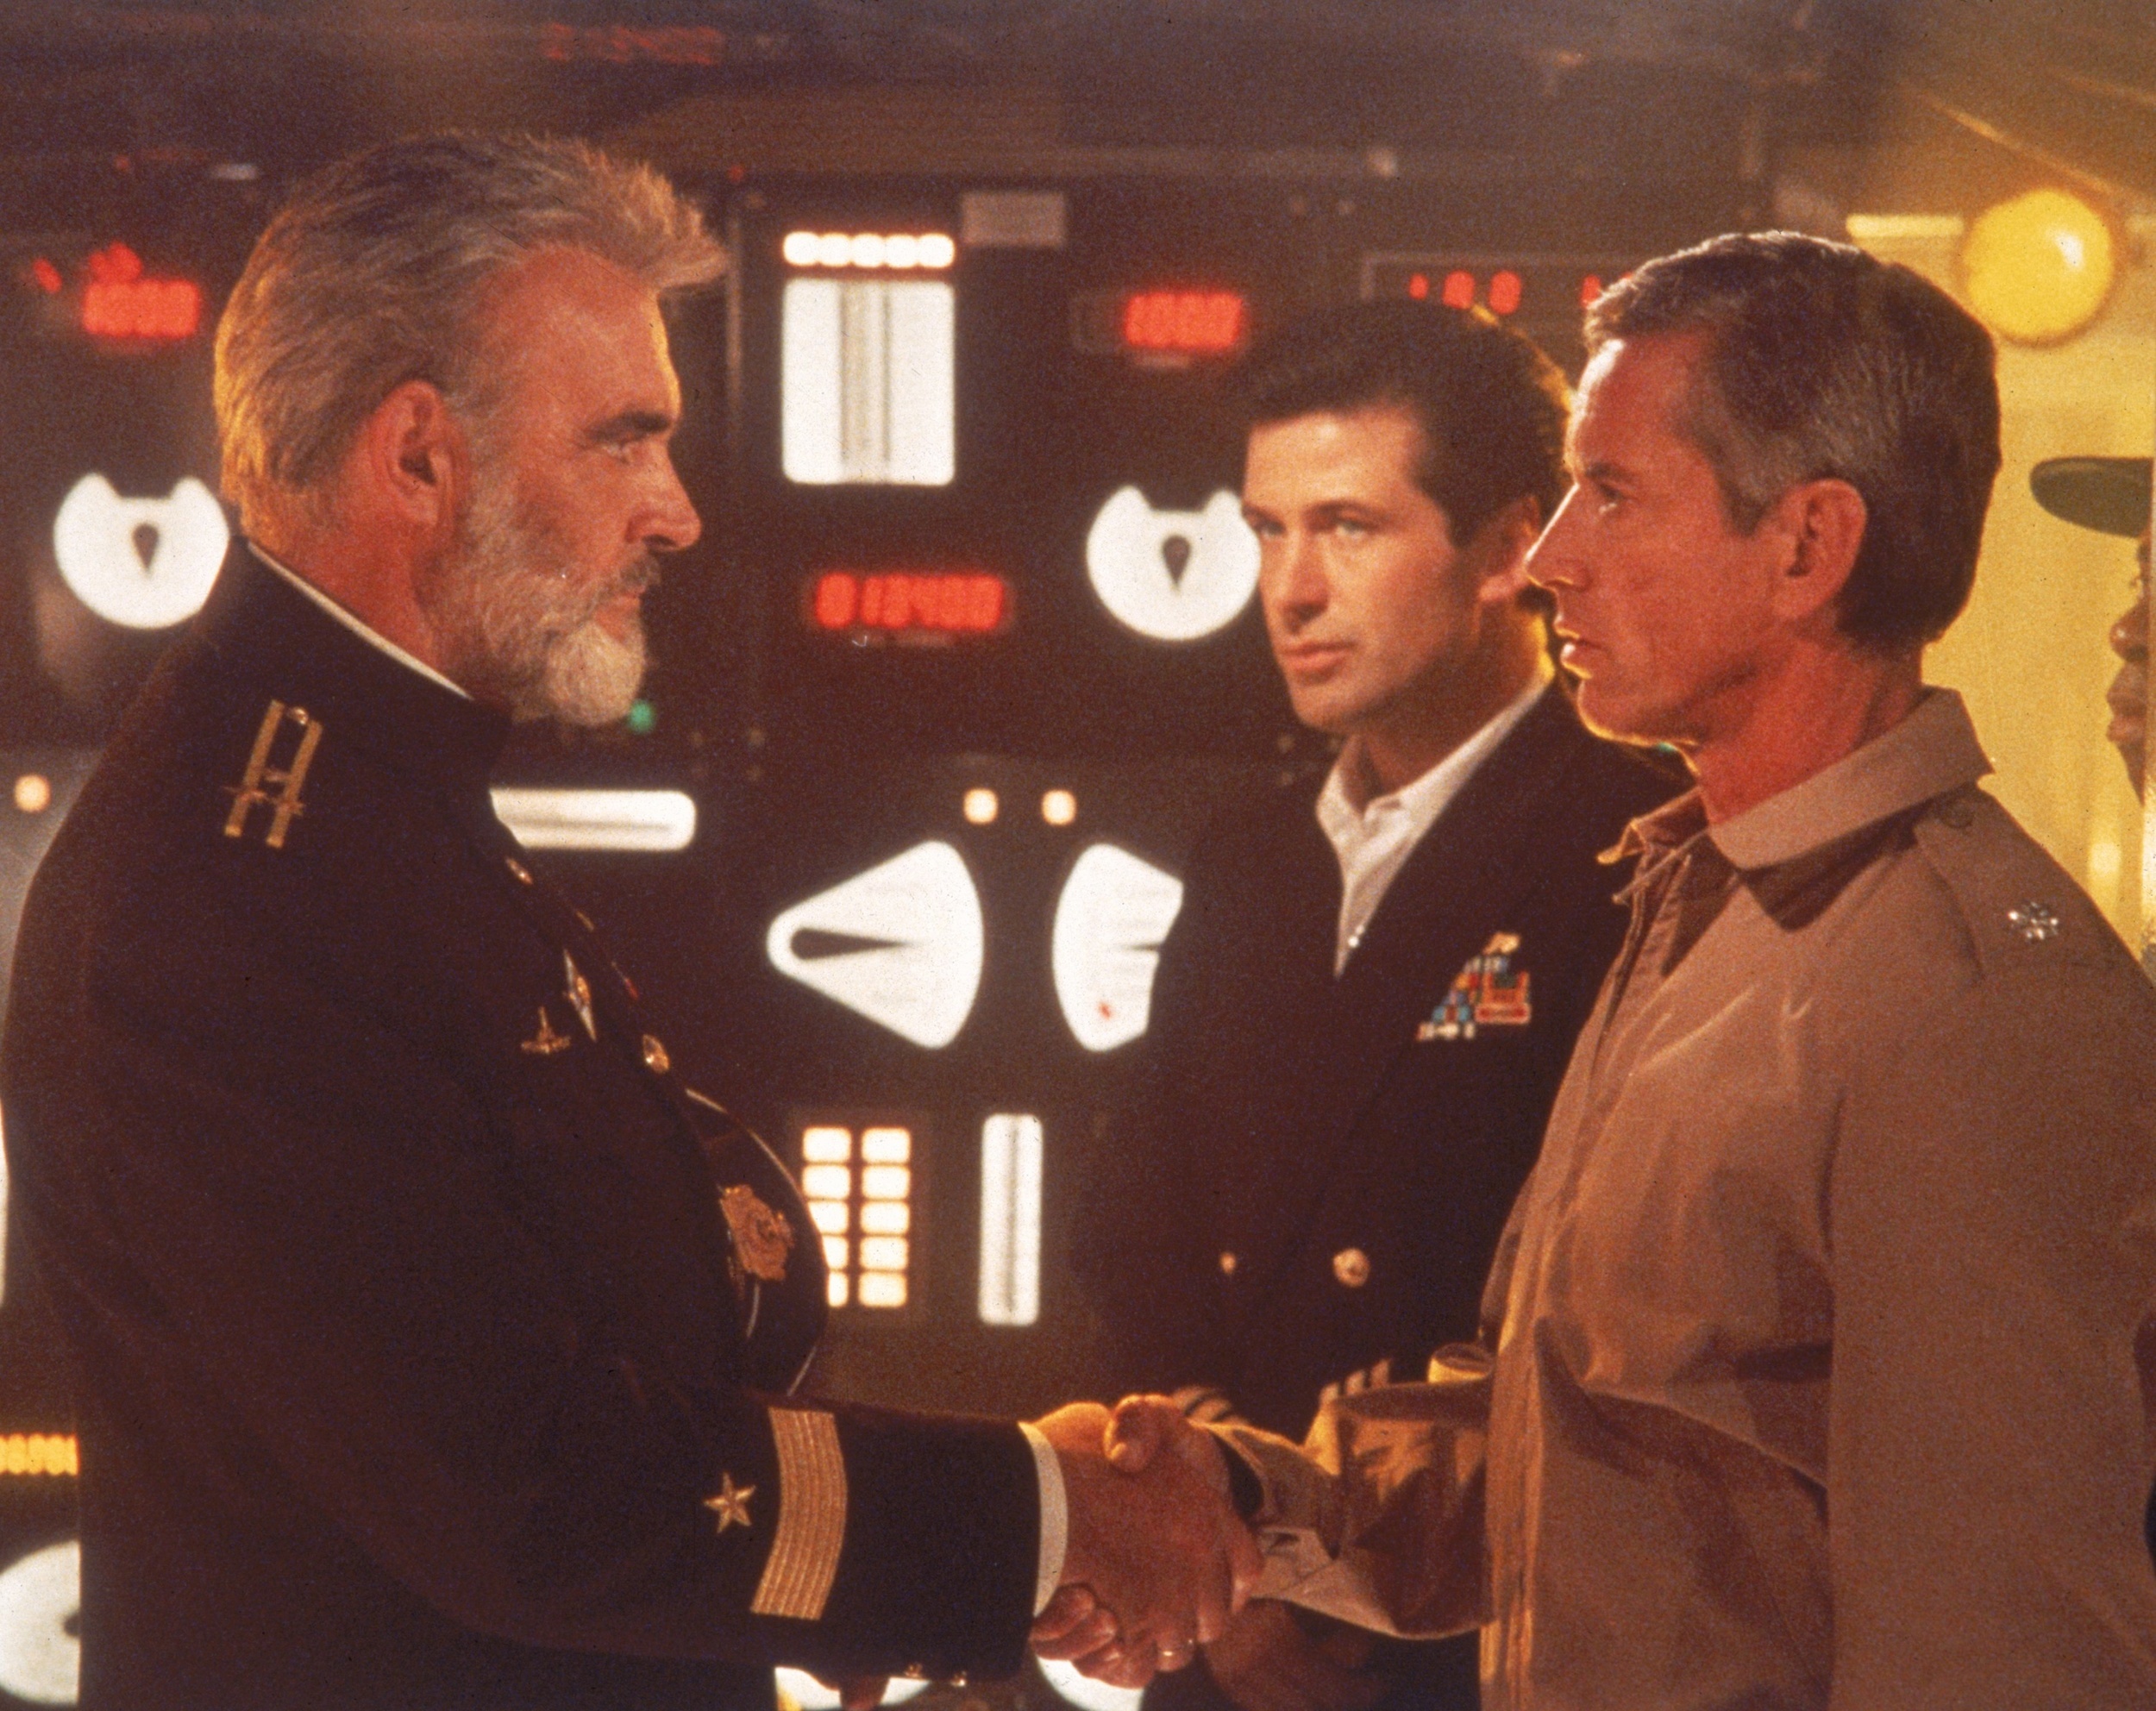 <p>A few actors in this military thriller could have turned to their personal pasts for the film. Connery had been in the Royal Navy, Scott Glenn was in the Marine Corps, and James Earl Jones served in the U.S. Army. Baldwin hadn’t served in the military, but he was trained on how to drive a submarine for the film.</p><p>You may also like: <a href='https://www.yardbarker.com/entertainment/articles/the_25_greatest_english_rock_bands_031524/s1__30317819'>The 25 greatest English rock bands</a></p>